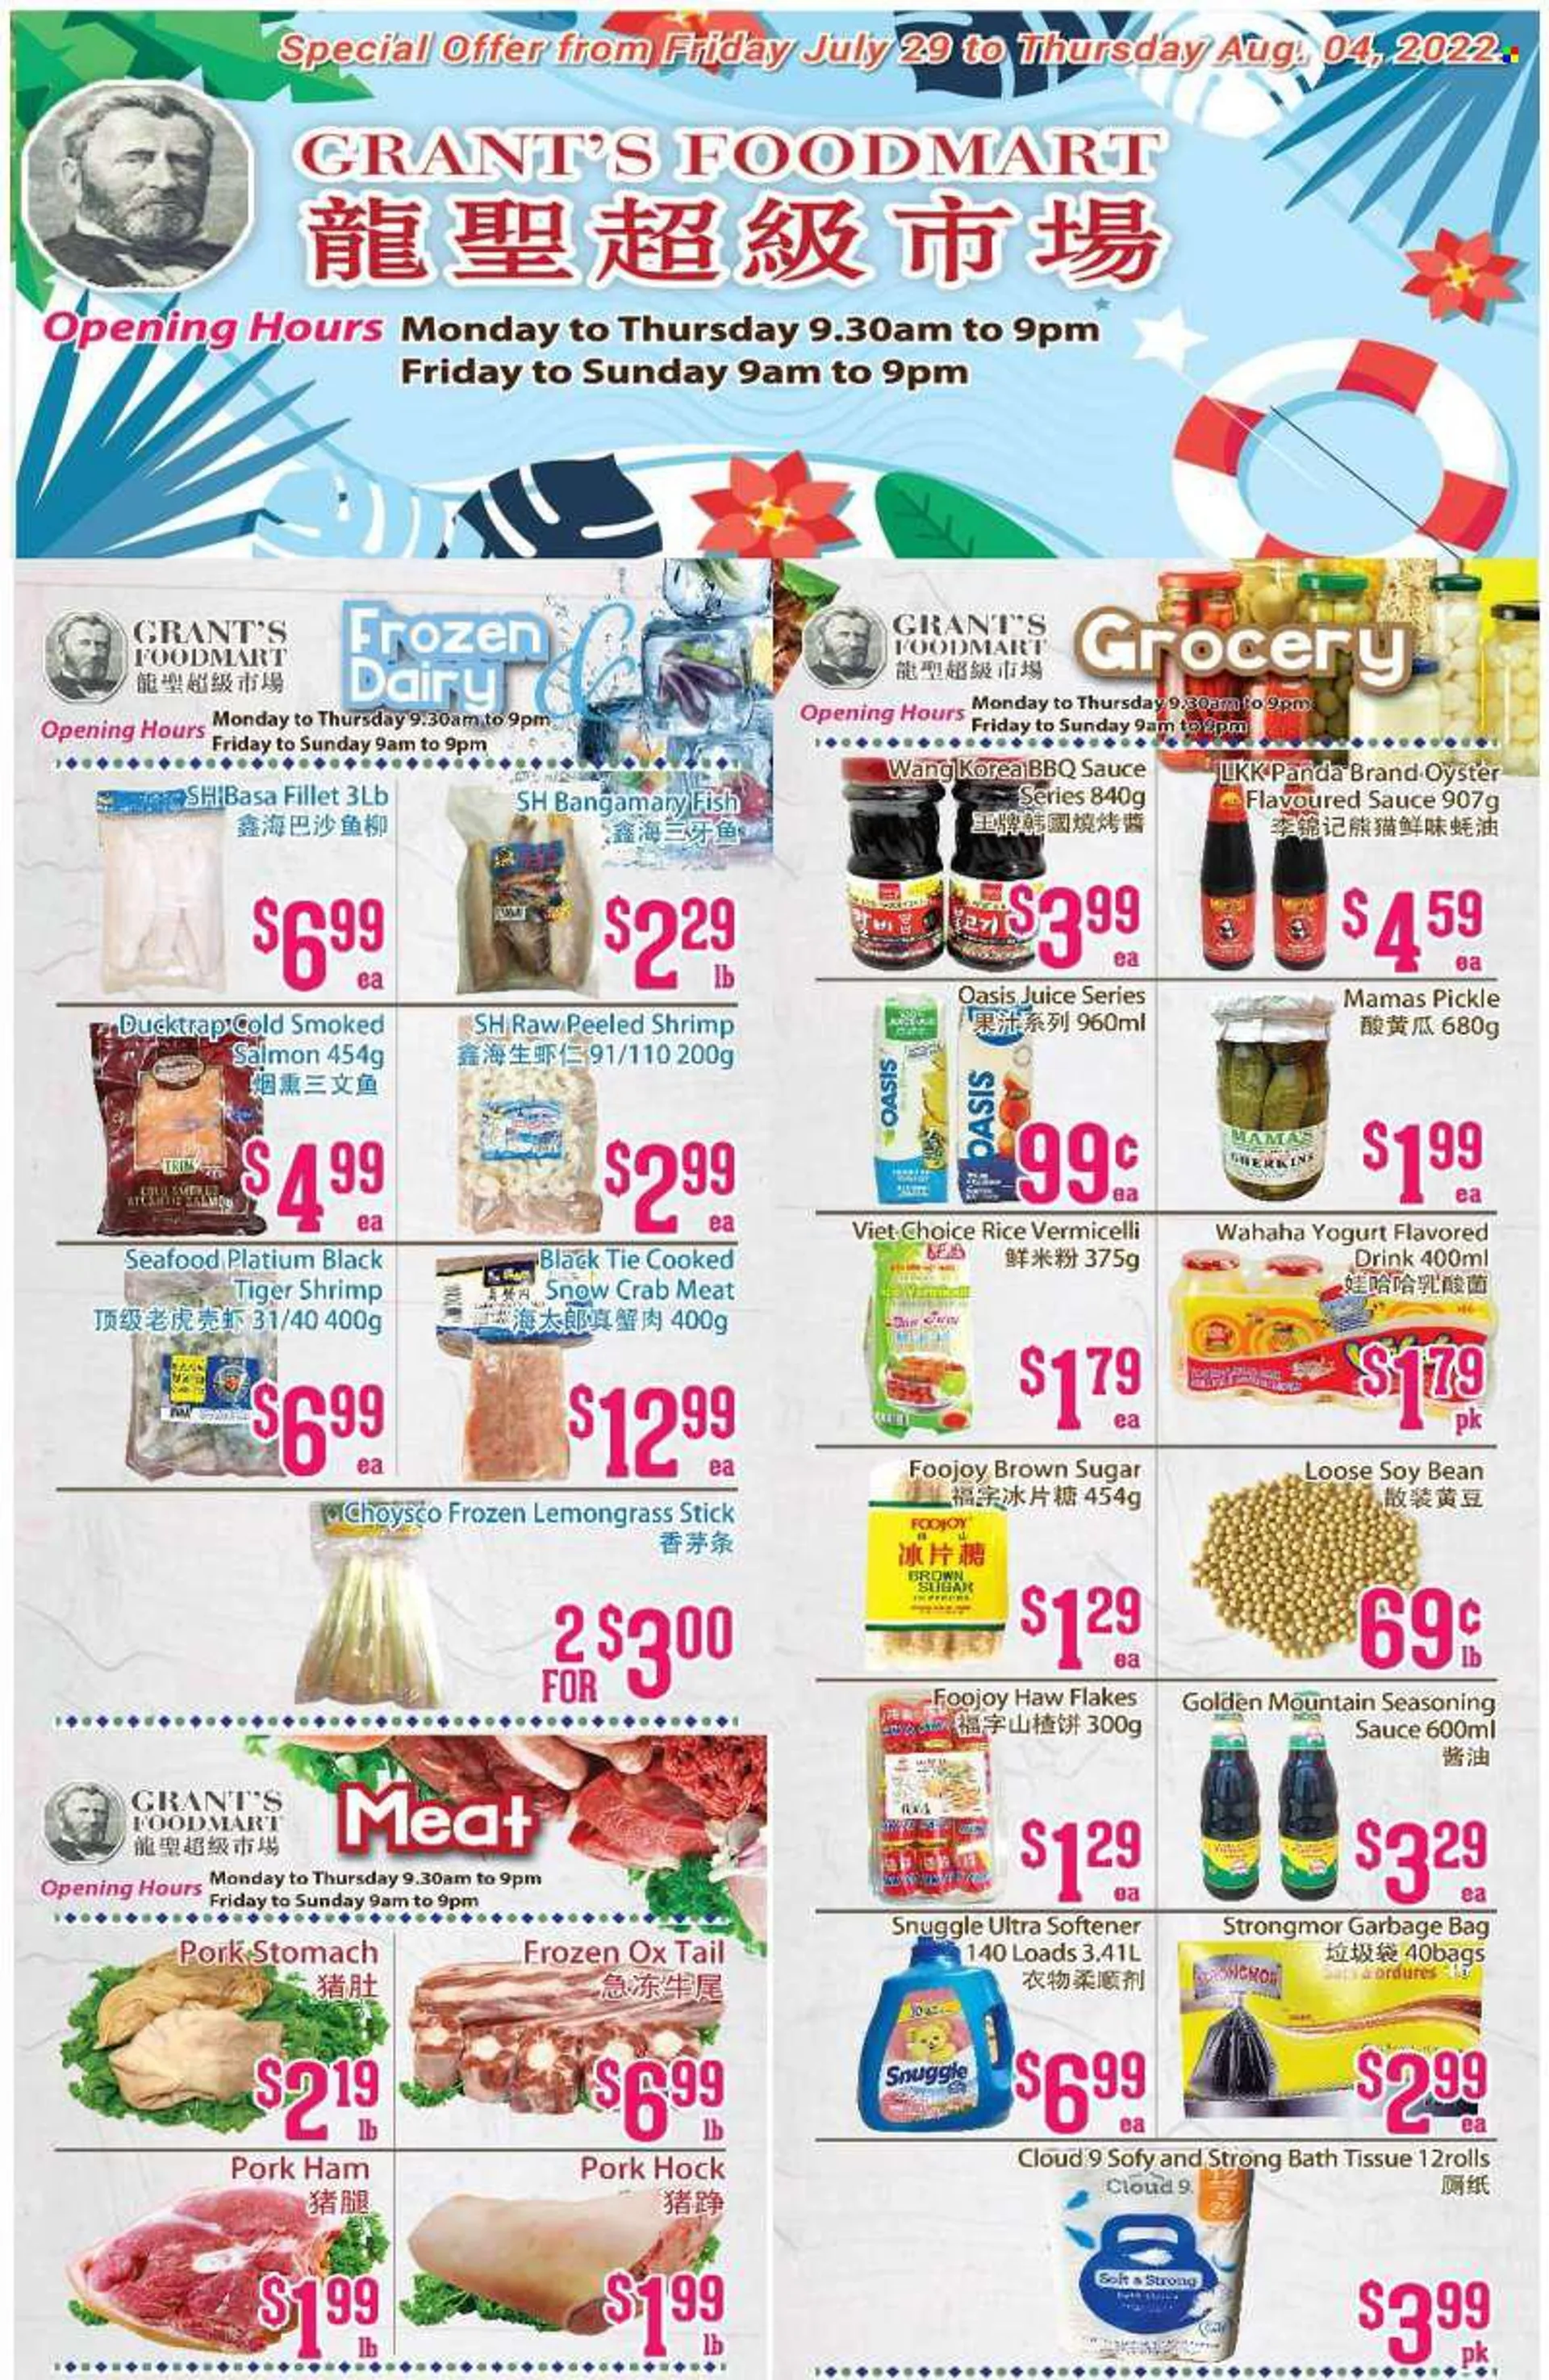 Grants Foodmart Flyer - July 29, 2022 - August 04, 2022 - Sales products - crab meat, salmon, smoked salmon, oysters, seafood, crab, fish, sauce, ham, yoghurt, Cloud 9, cane sugar, rice, rice vermicelli, spice, barbecue sauce, juice, Grants, pork hock, po